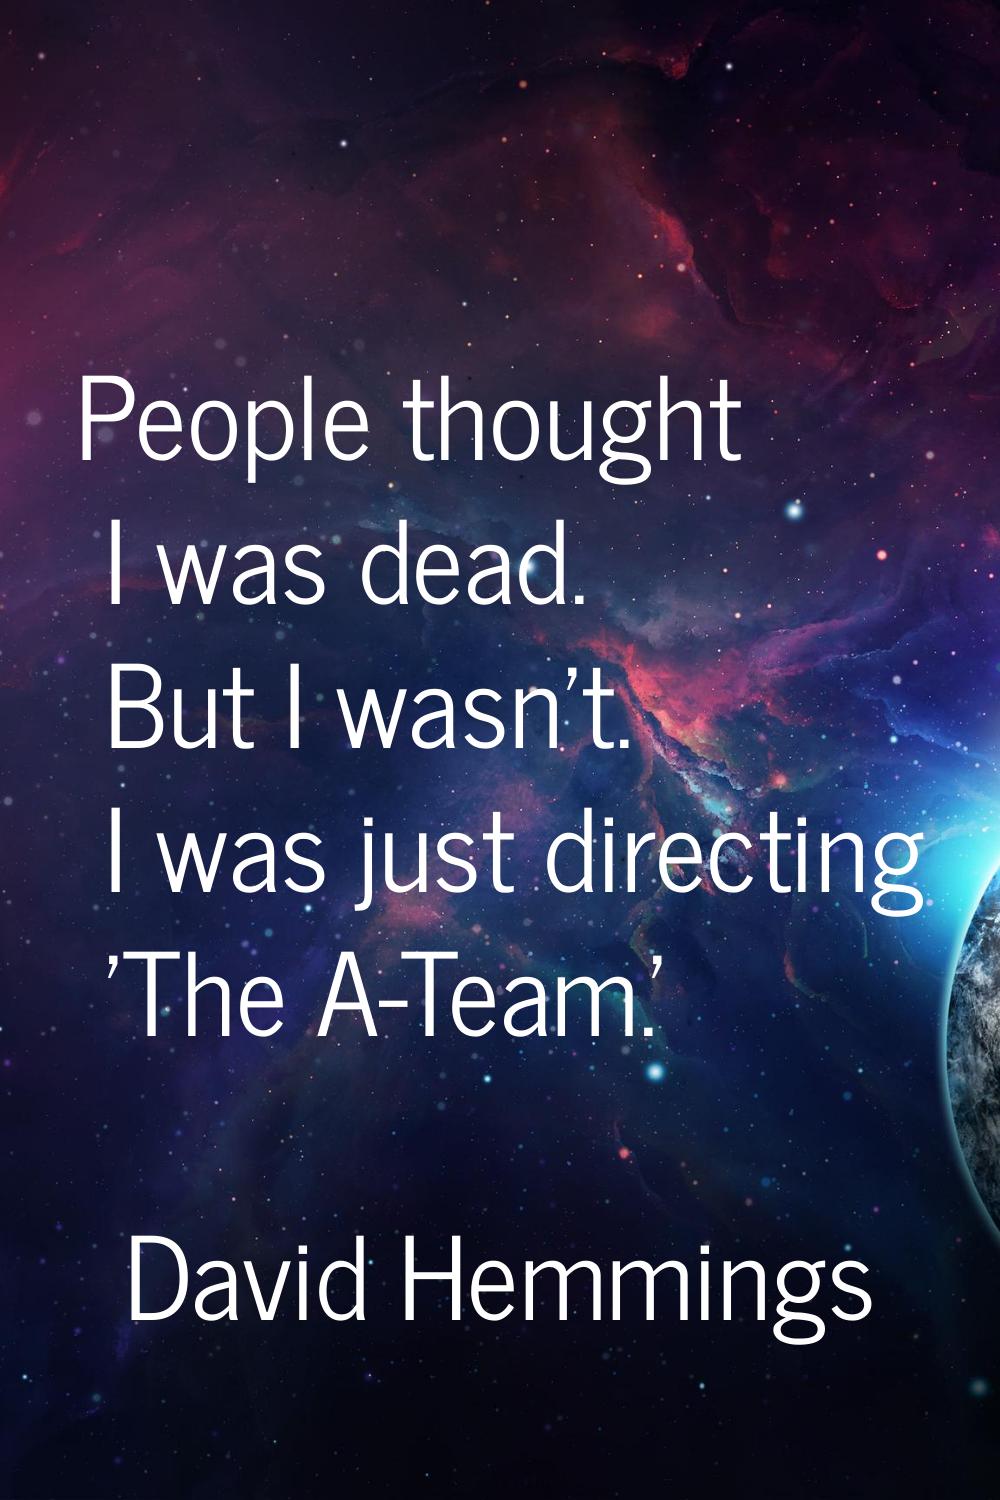 People thought I was dead. But I wasn't. I was just directing 'The A-Team.'